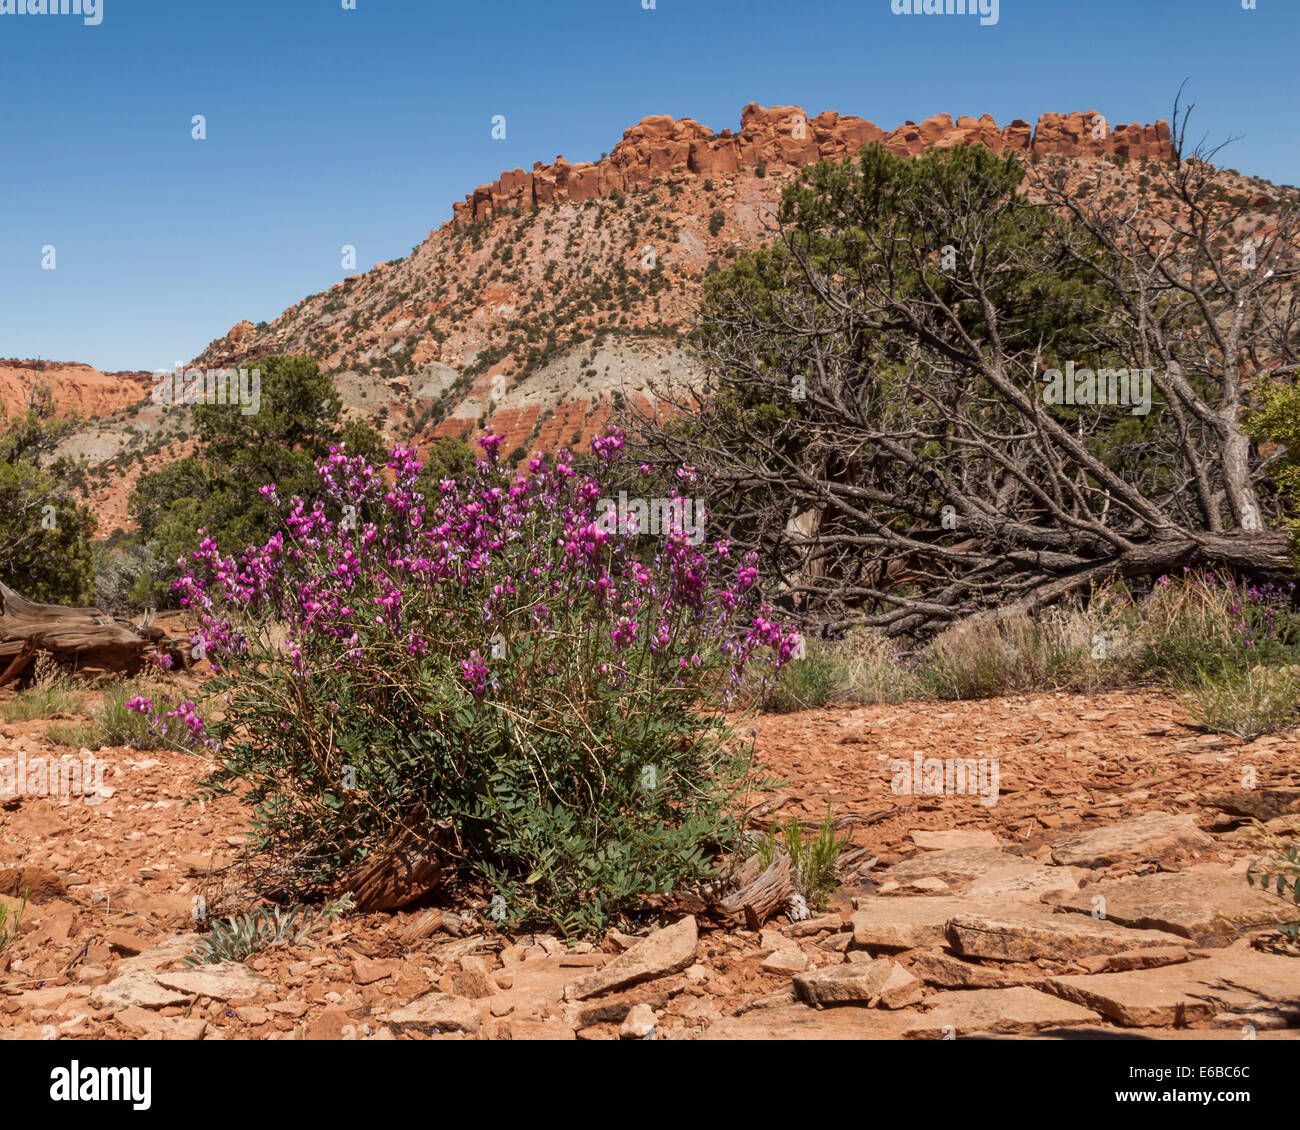 USA, Utah, Torrey, Capitol Reef National Park. Utah sweetvetch and sandstone rock formations along the South Draw Road. Stock Photo